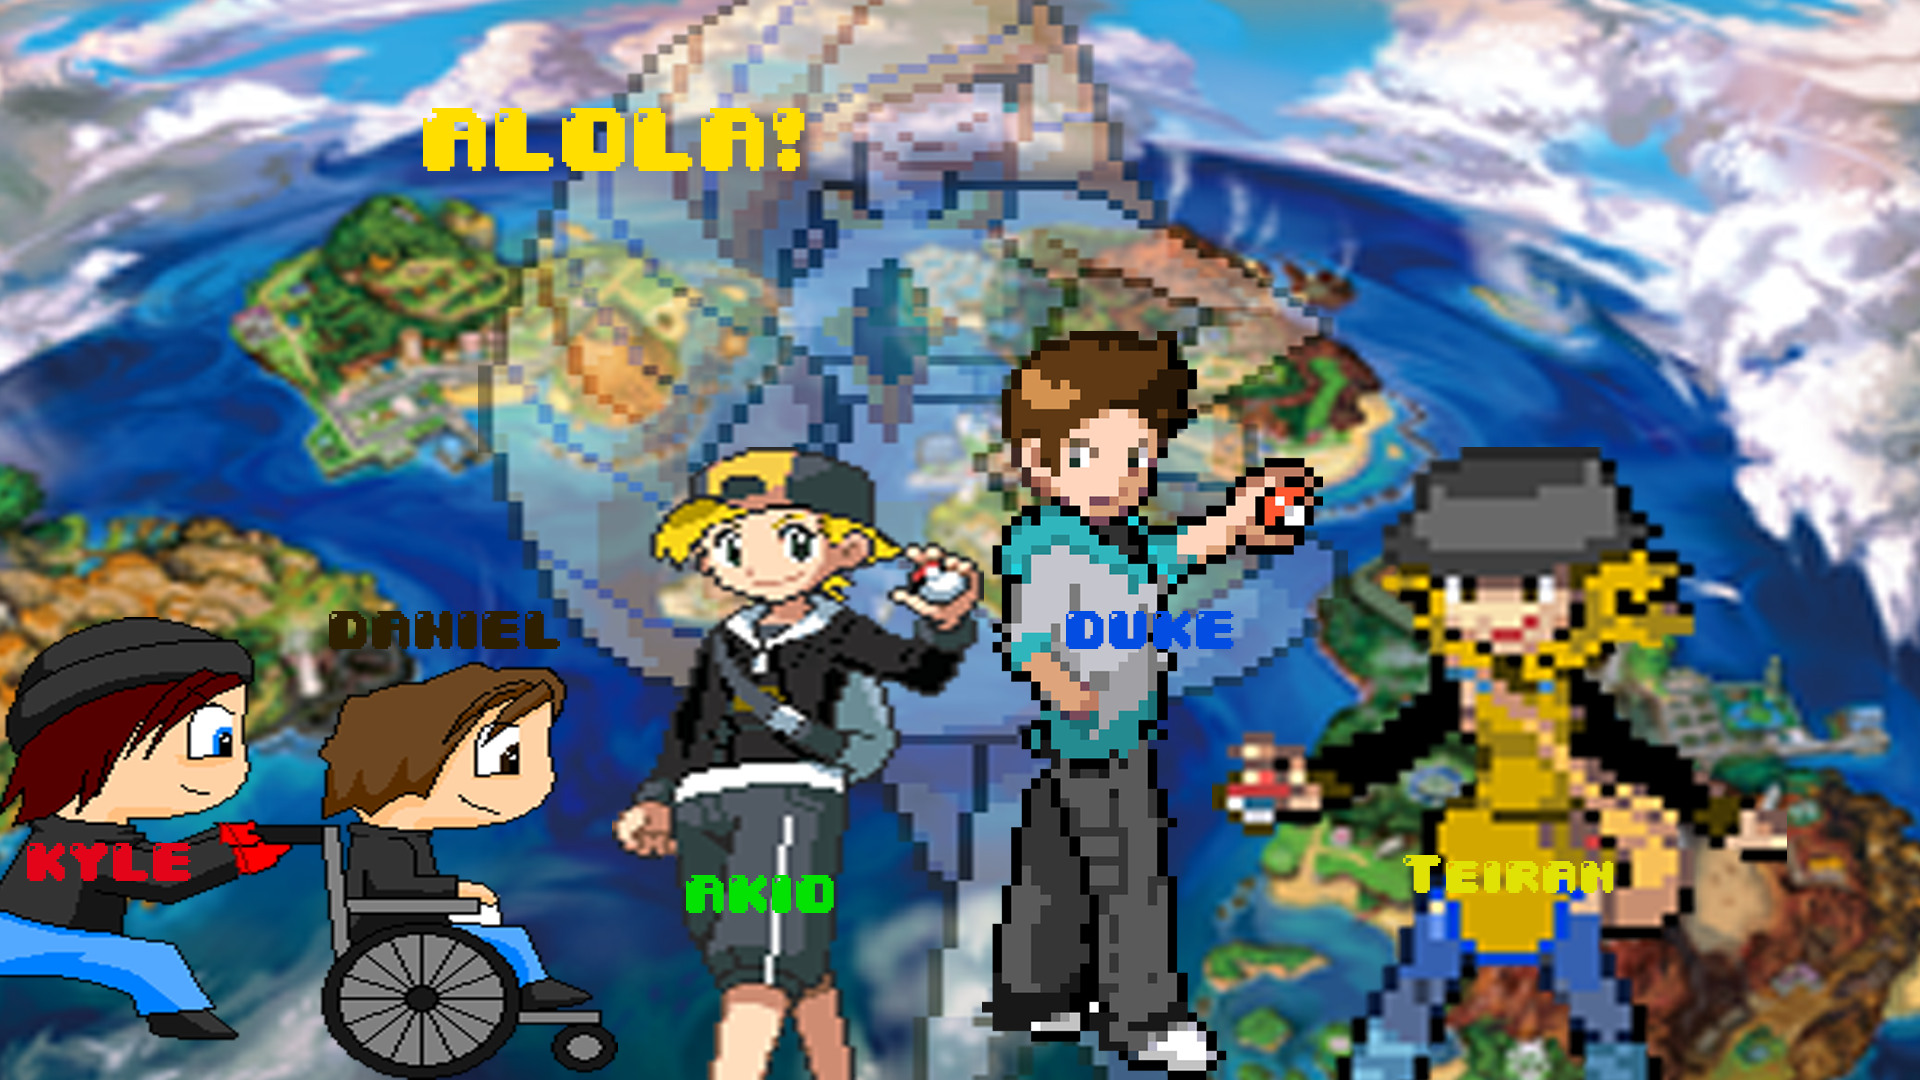 An Adventure In Alola.png